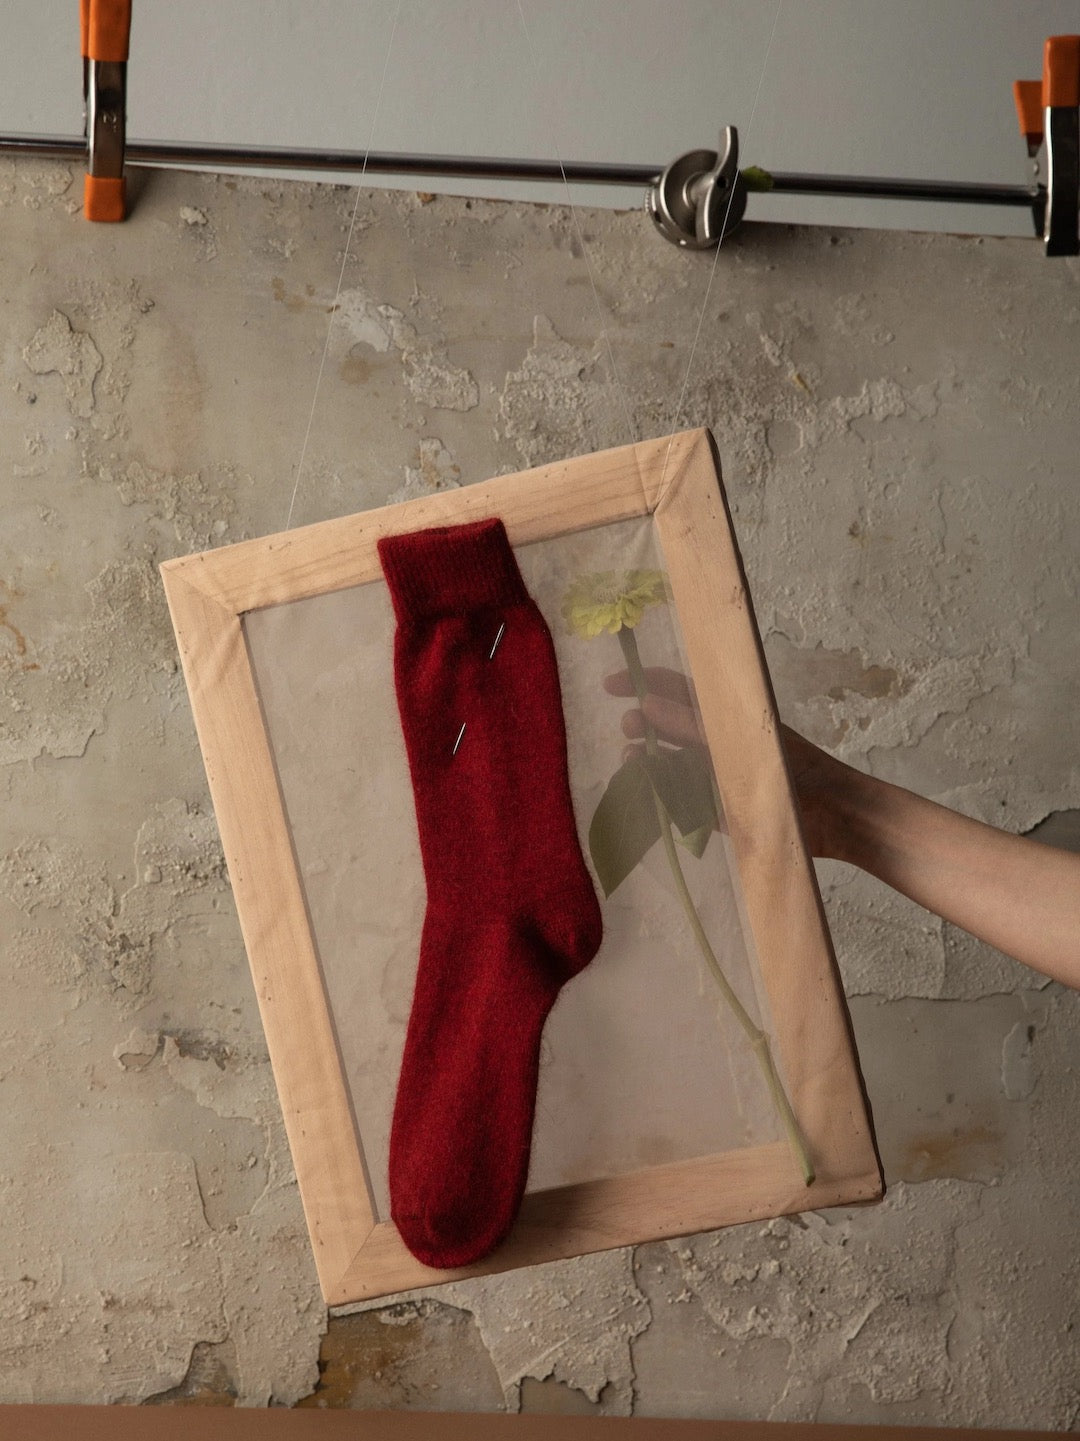 A Francie Possum Merino Socks – Crimson, marked with a size chart indicating EUR, UK, and US shoe sizes, is pinned inside a wooden frame against a concrete wall; a hand is visible adjusting the frame.